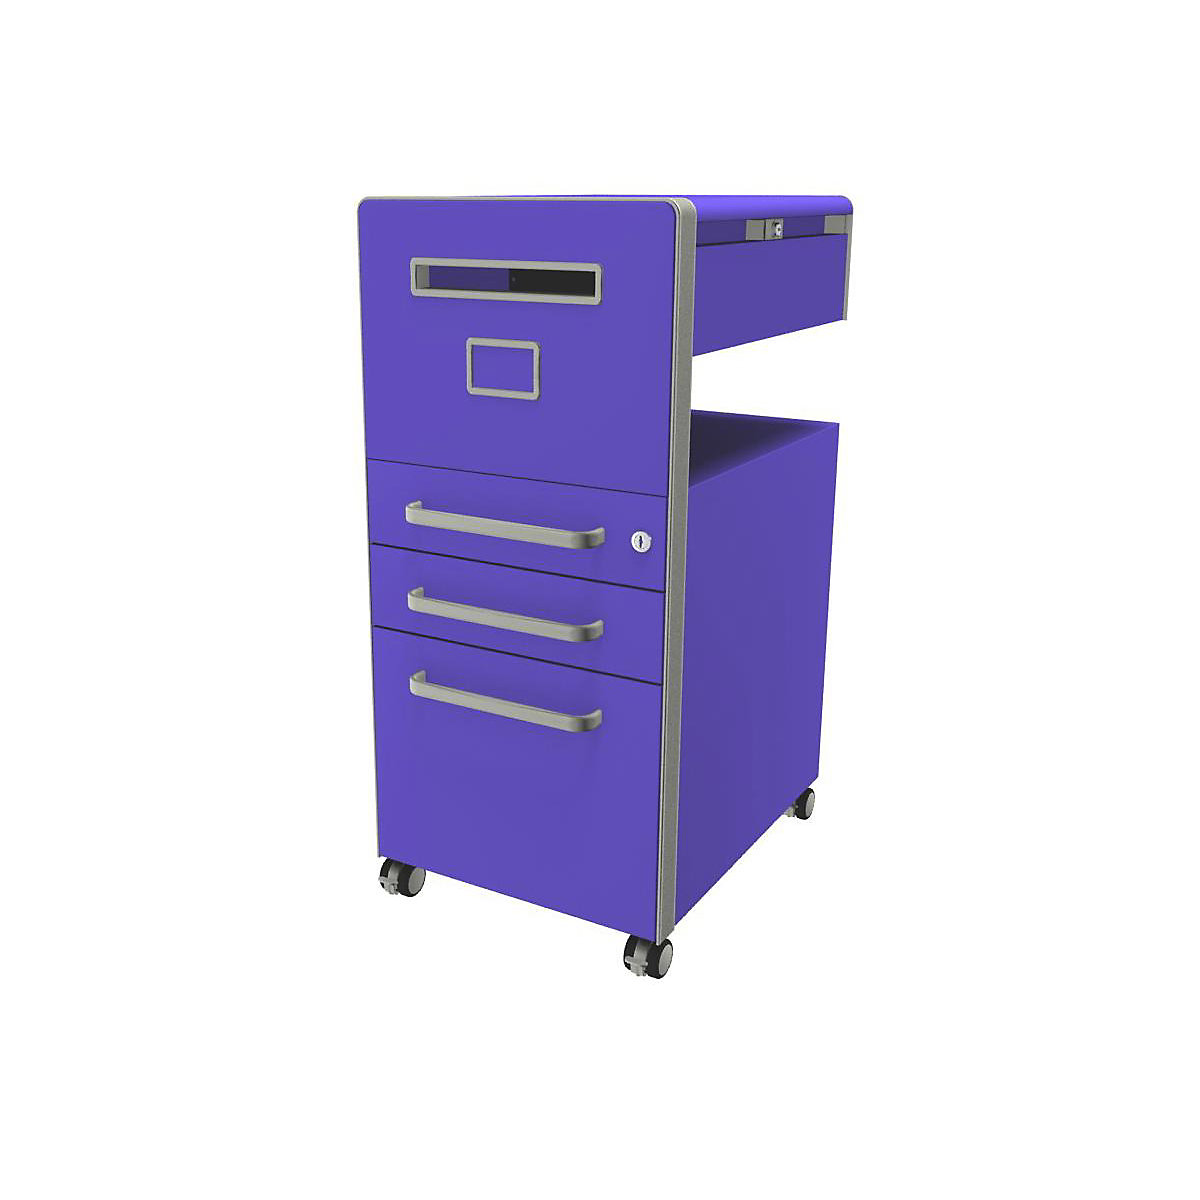 Bite™ pedestal furniture, with 1 whiteboard, opens on the left side – BISLEY, with 2 universal drawers, 1 suspension file drawer, parma-33